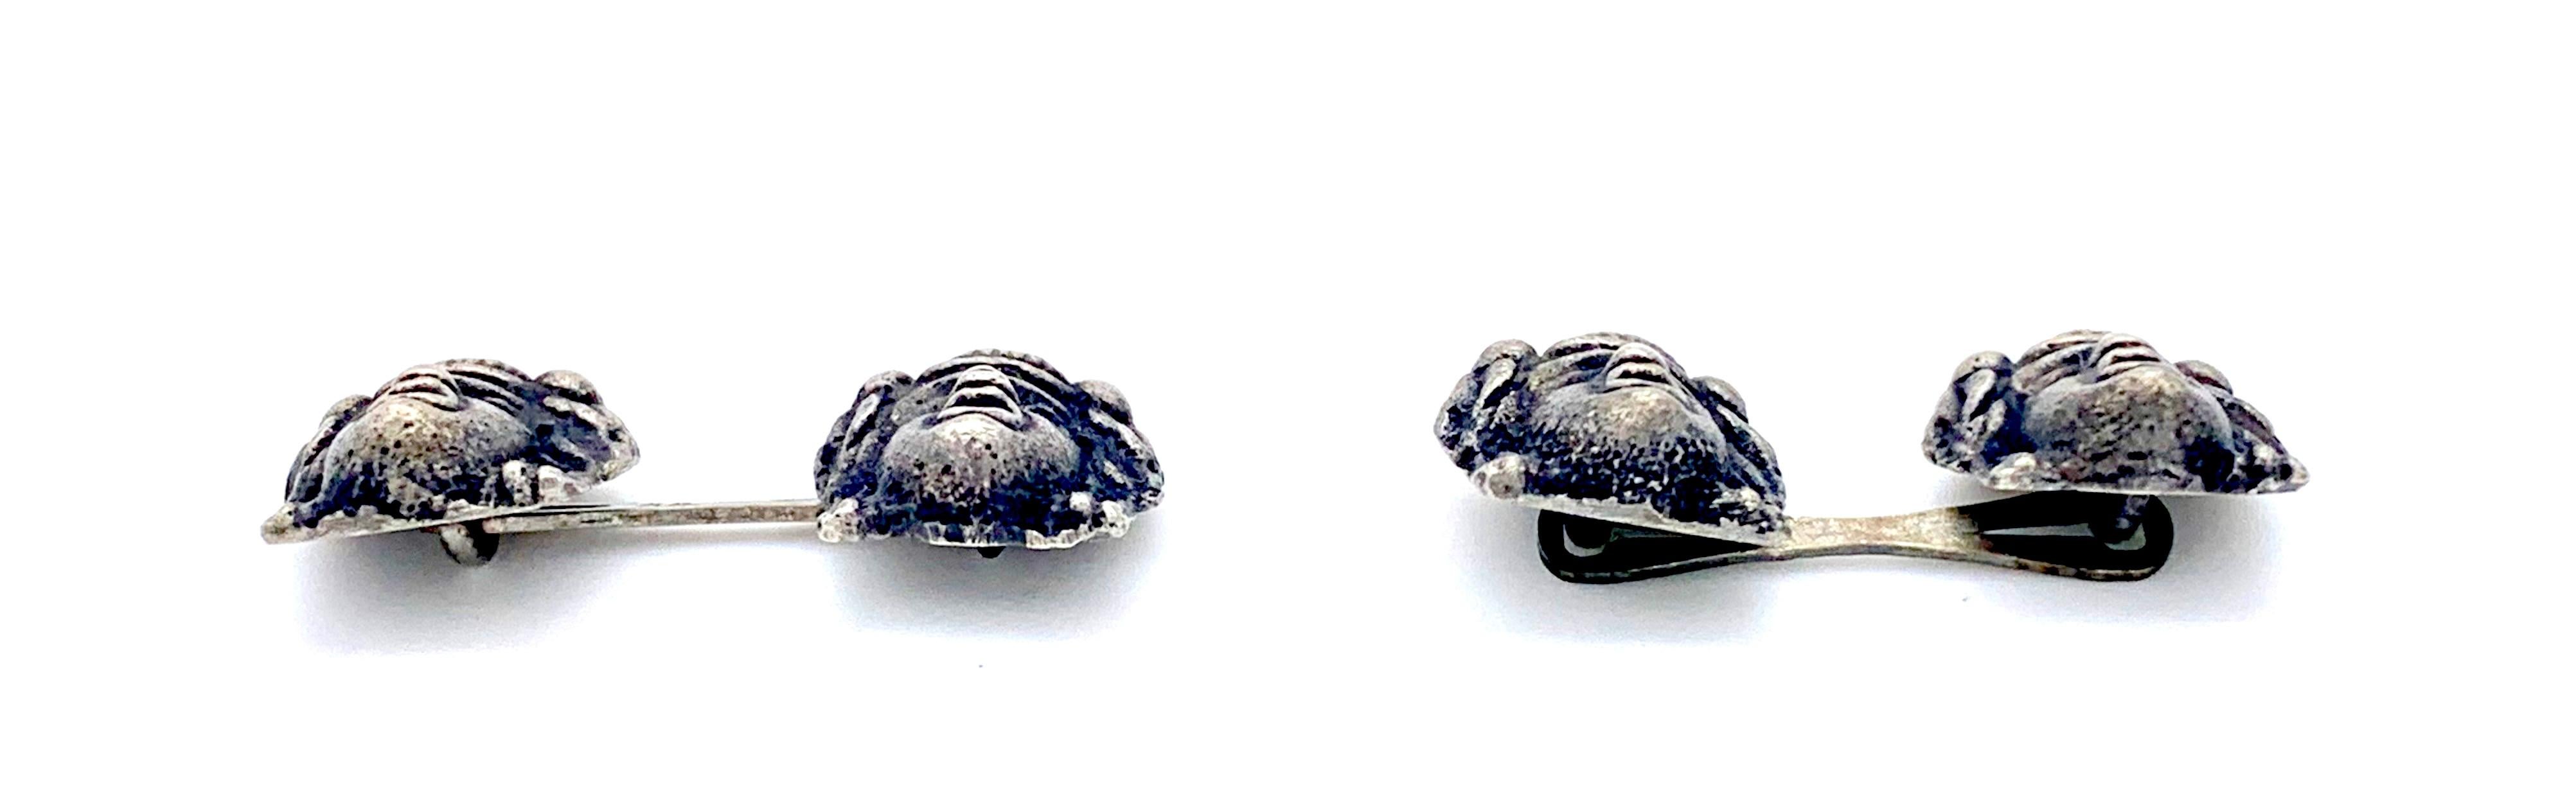 These cufflinks were made around 1900 and are made up from miniature copies of Greco-Roman theatre masks cast out of silver. The cufflinks are impressed with Austrian hallmarks and 800 for silver content. 
The measurements apply to one mask only.